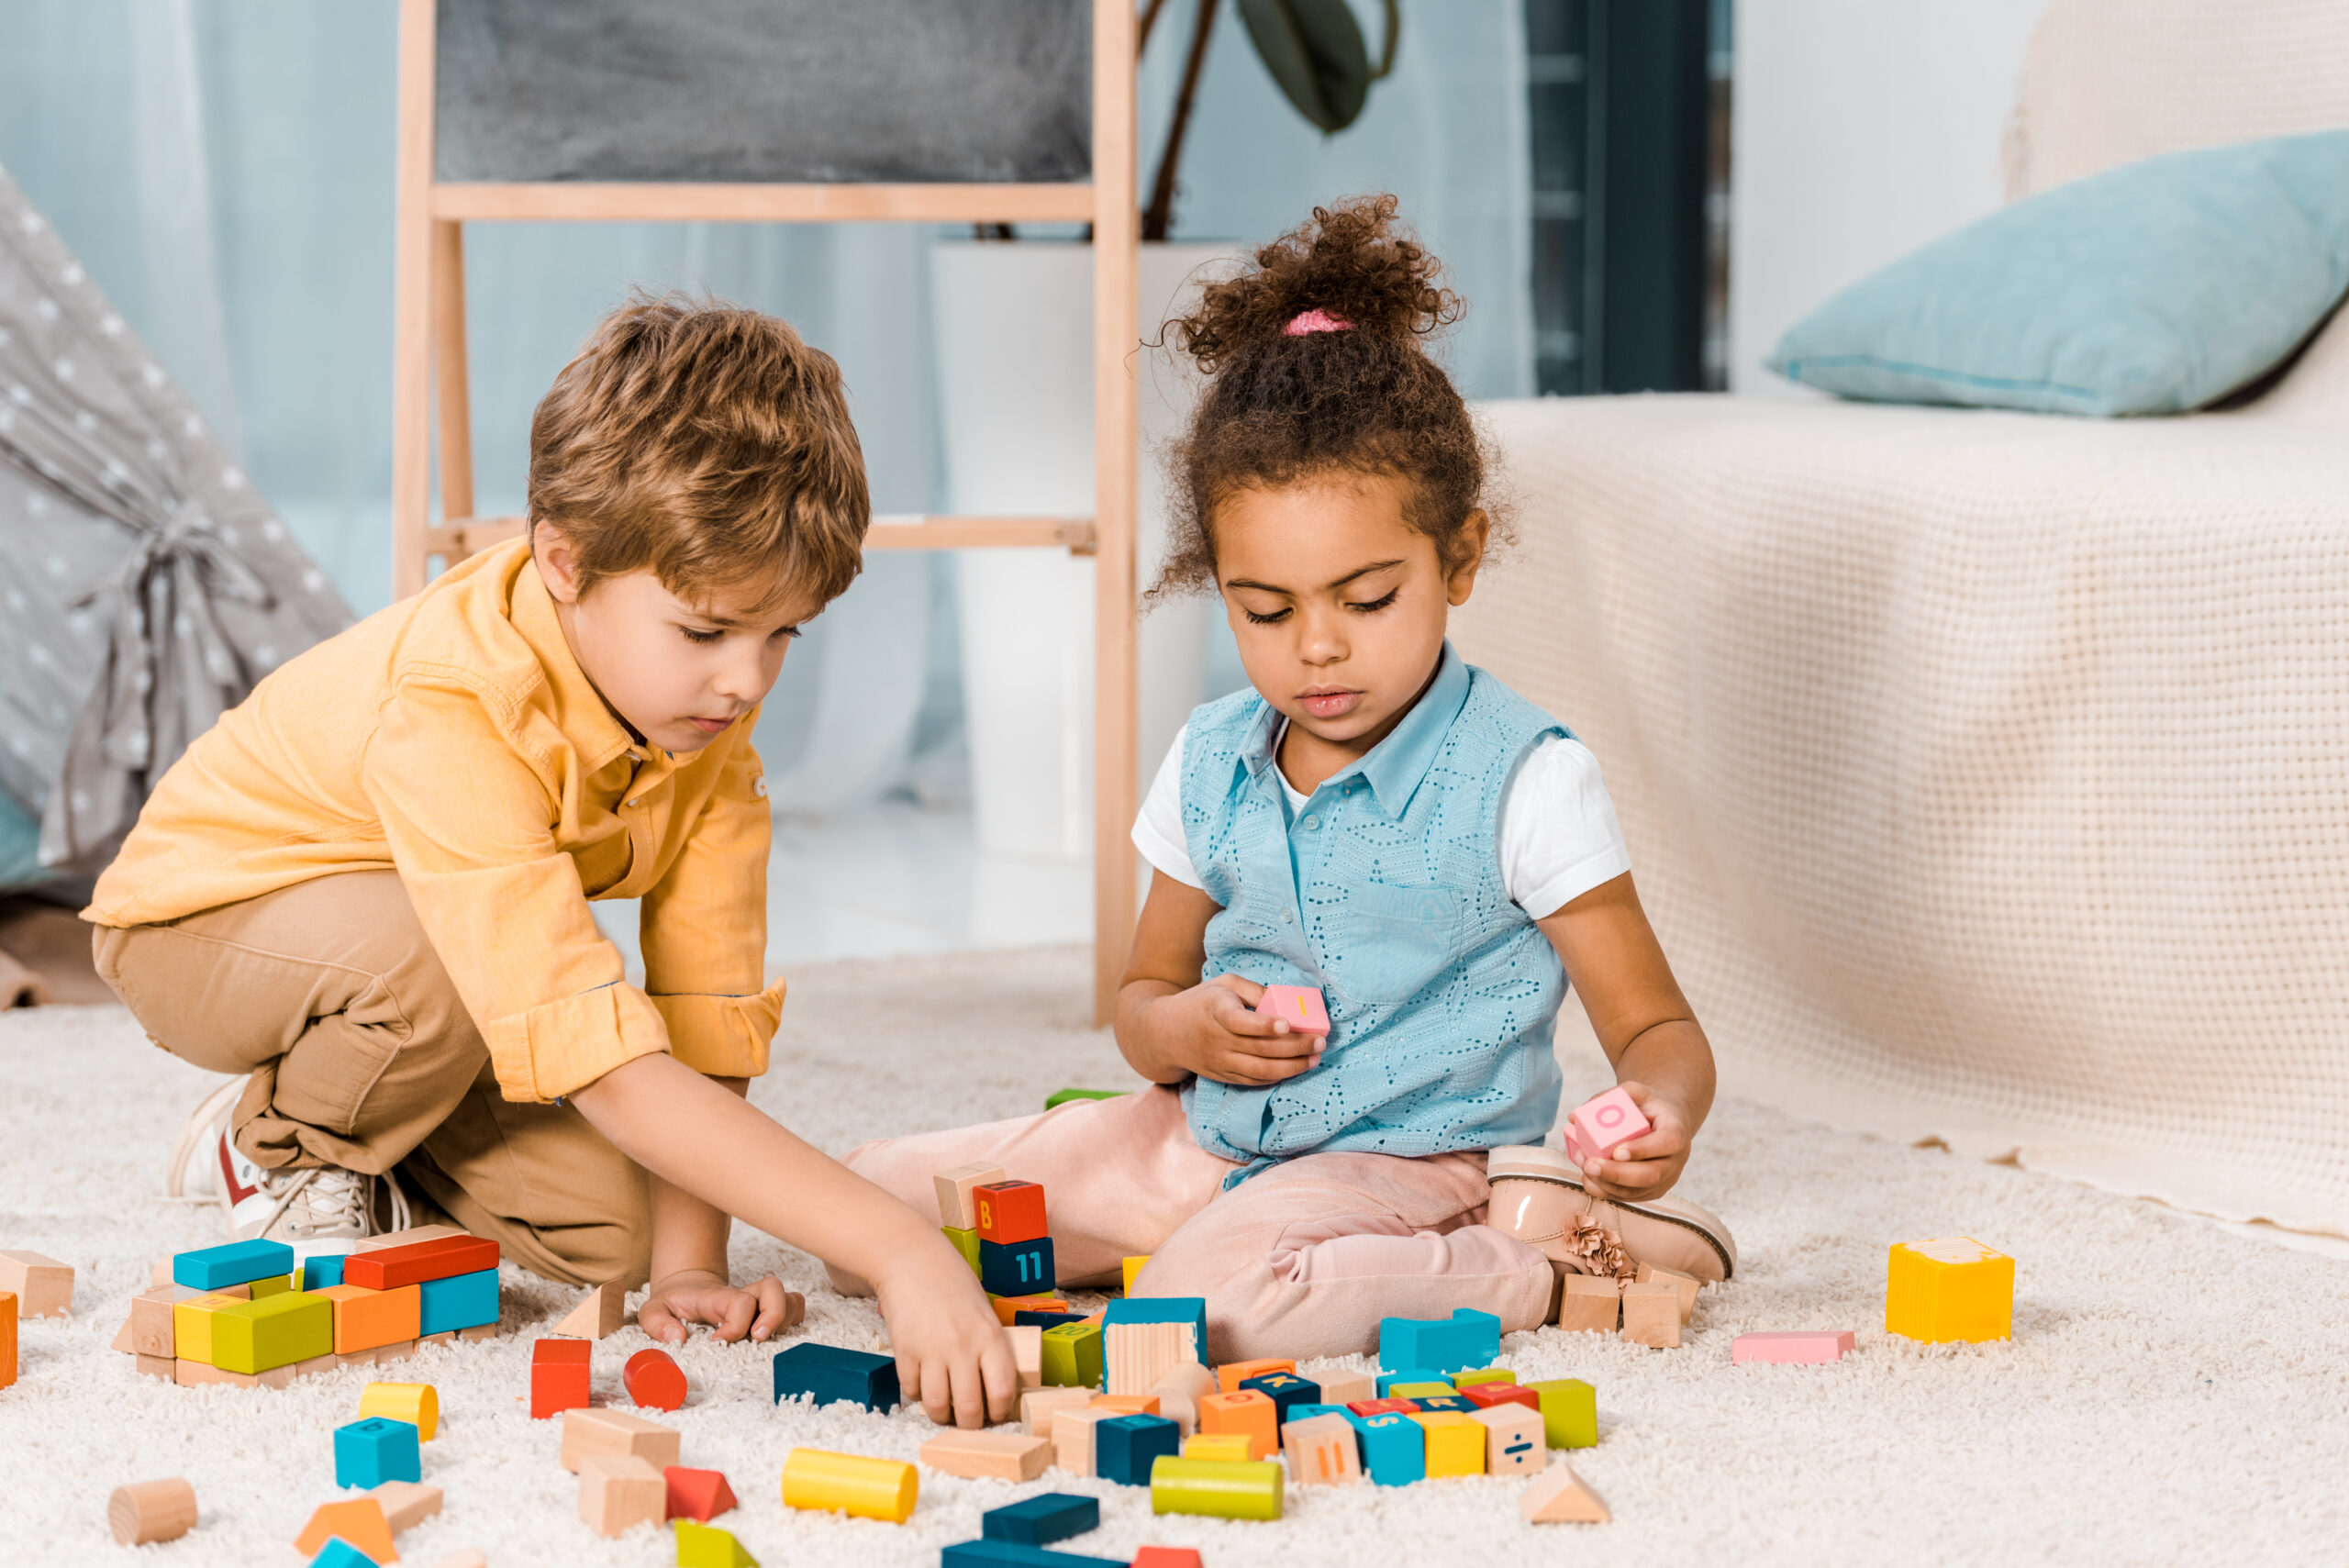 social skills therapy icon - two kids playing with blocks